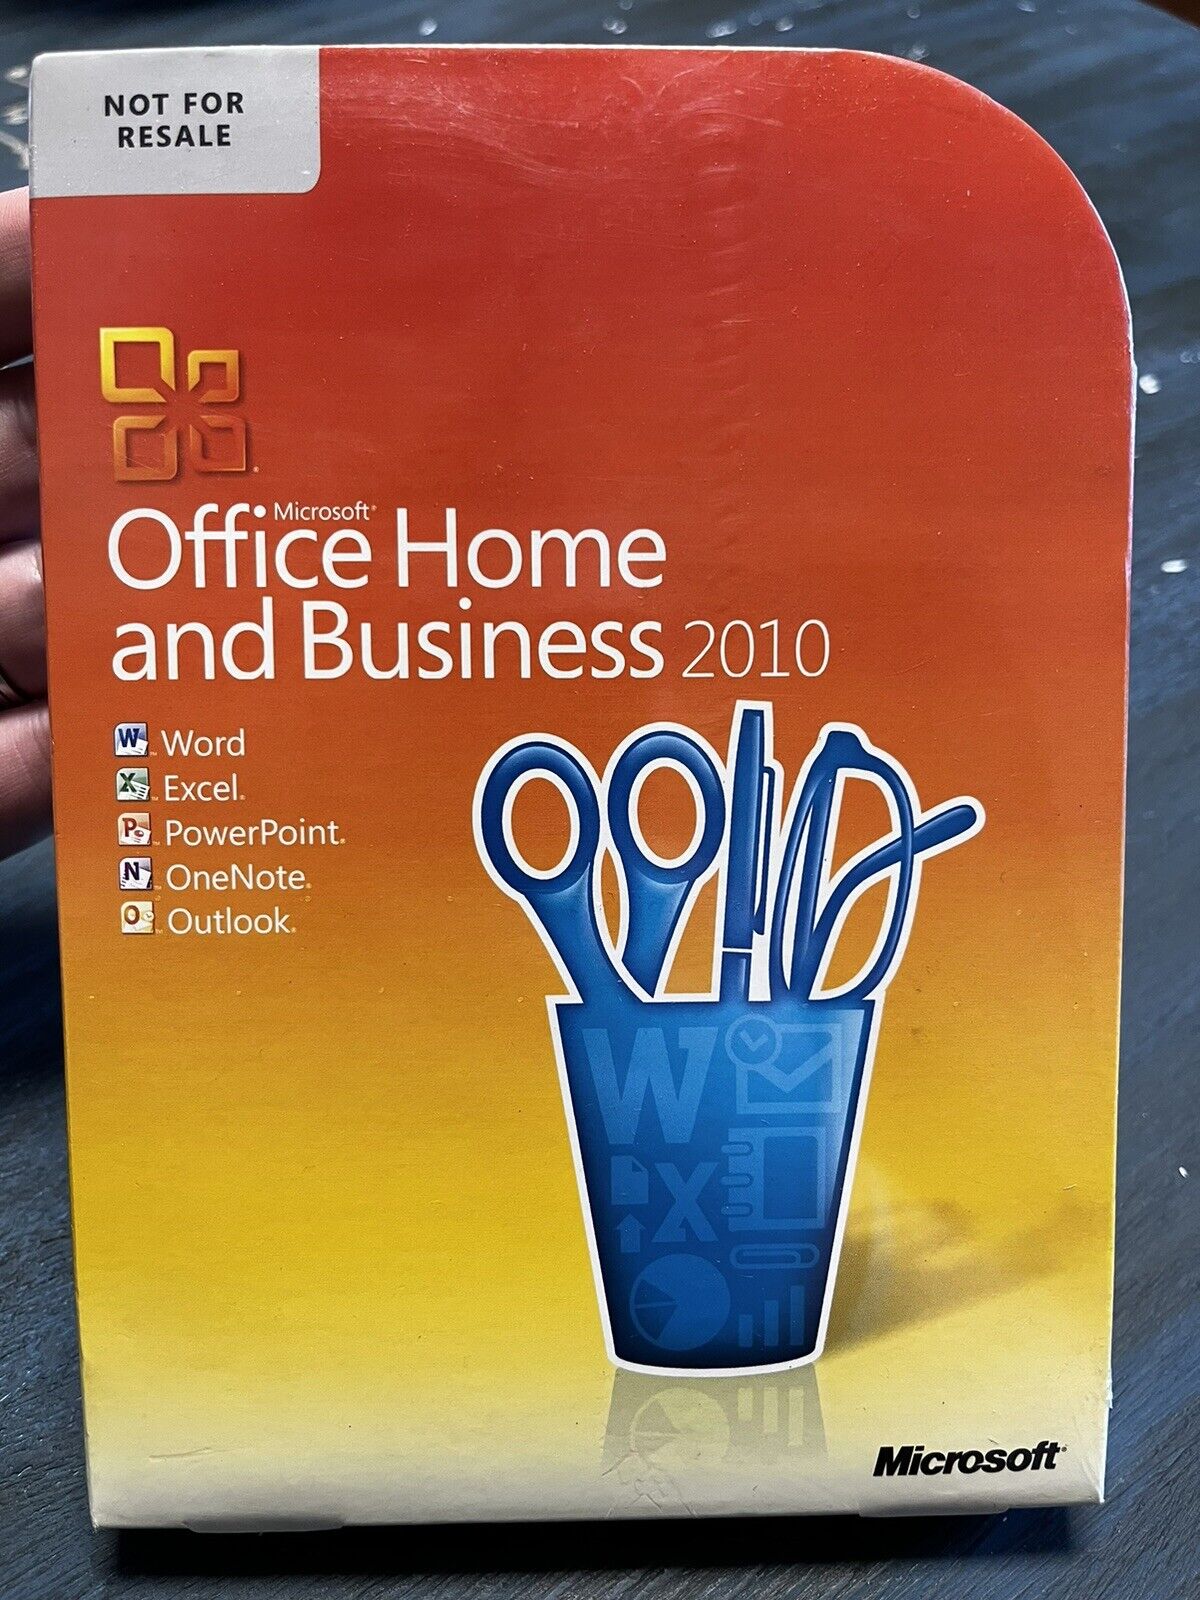 Microsoft Office 2010 Home and Business For 2 PCs Full Version BRAND NEW SEALED